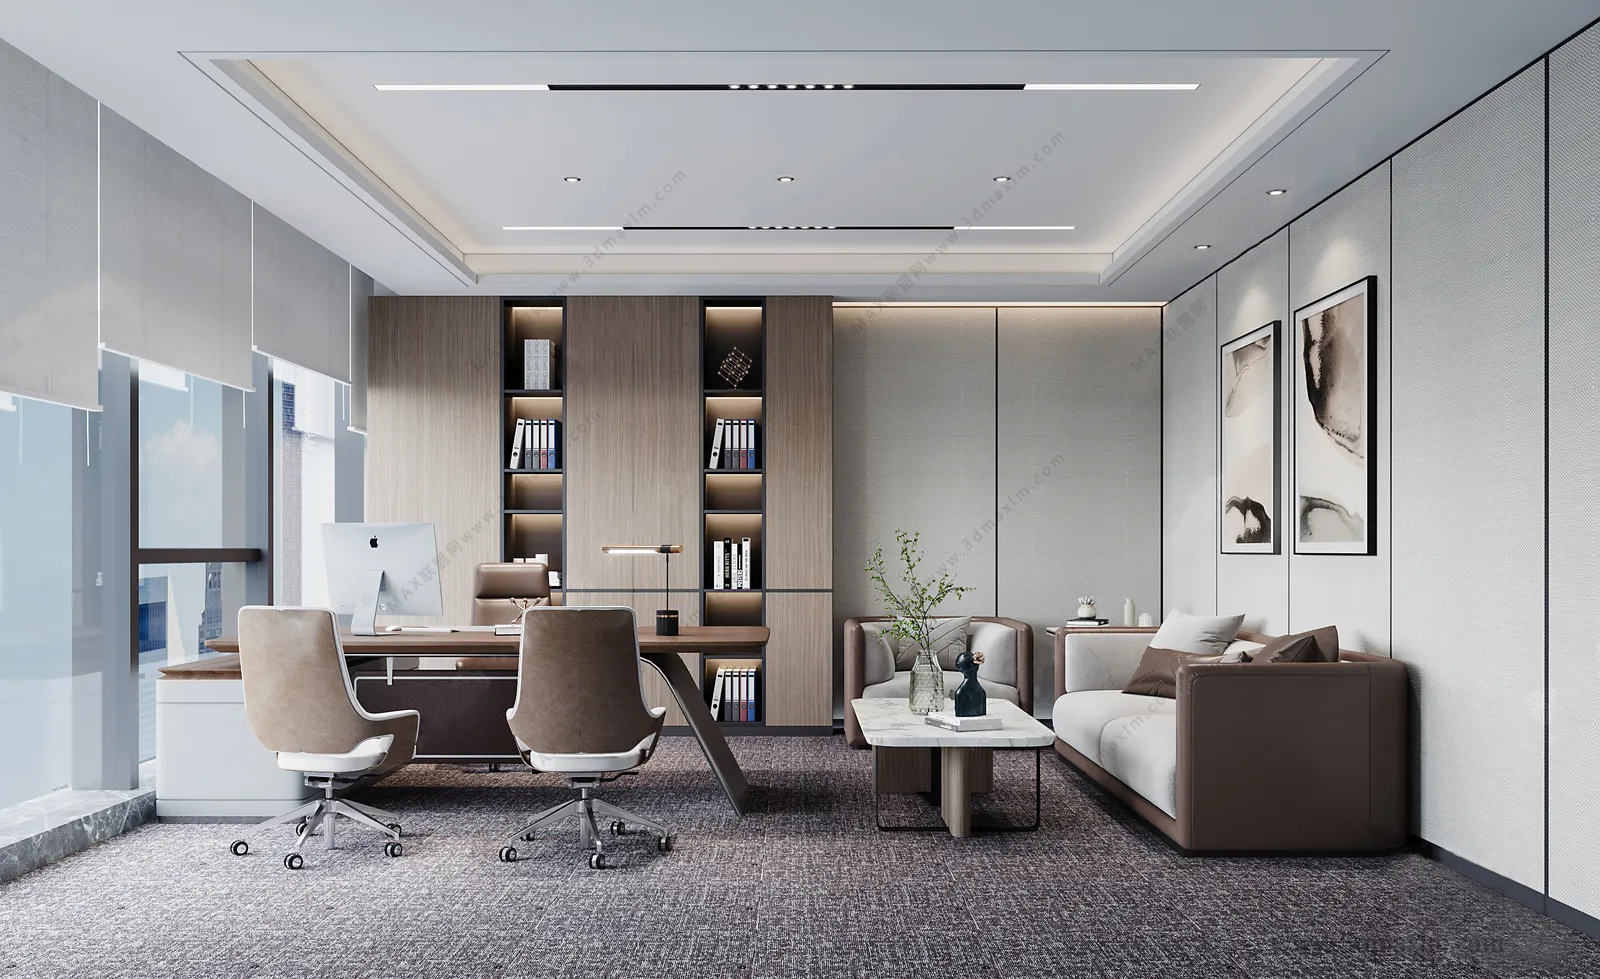 3D OFFICE INTERIOR (VRAY) – MANAGER ROOM 3D SCENES – 001